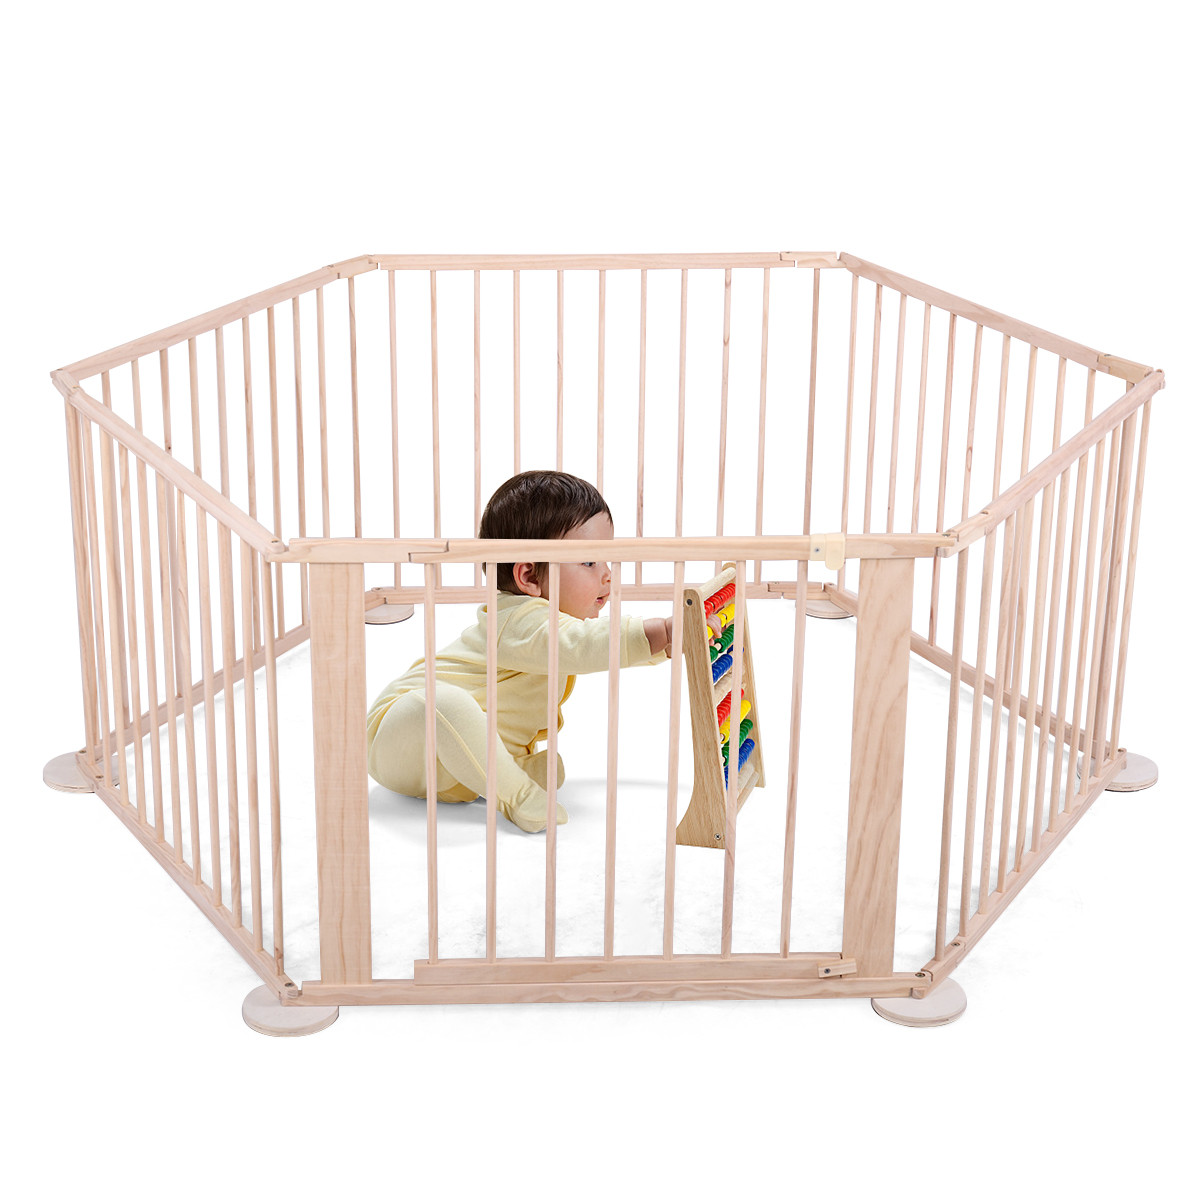 Portable Fence For Kids
 Wood Baby Playpen 6 Panel Kids Safety Play Center Portable